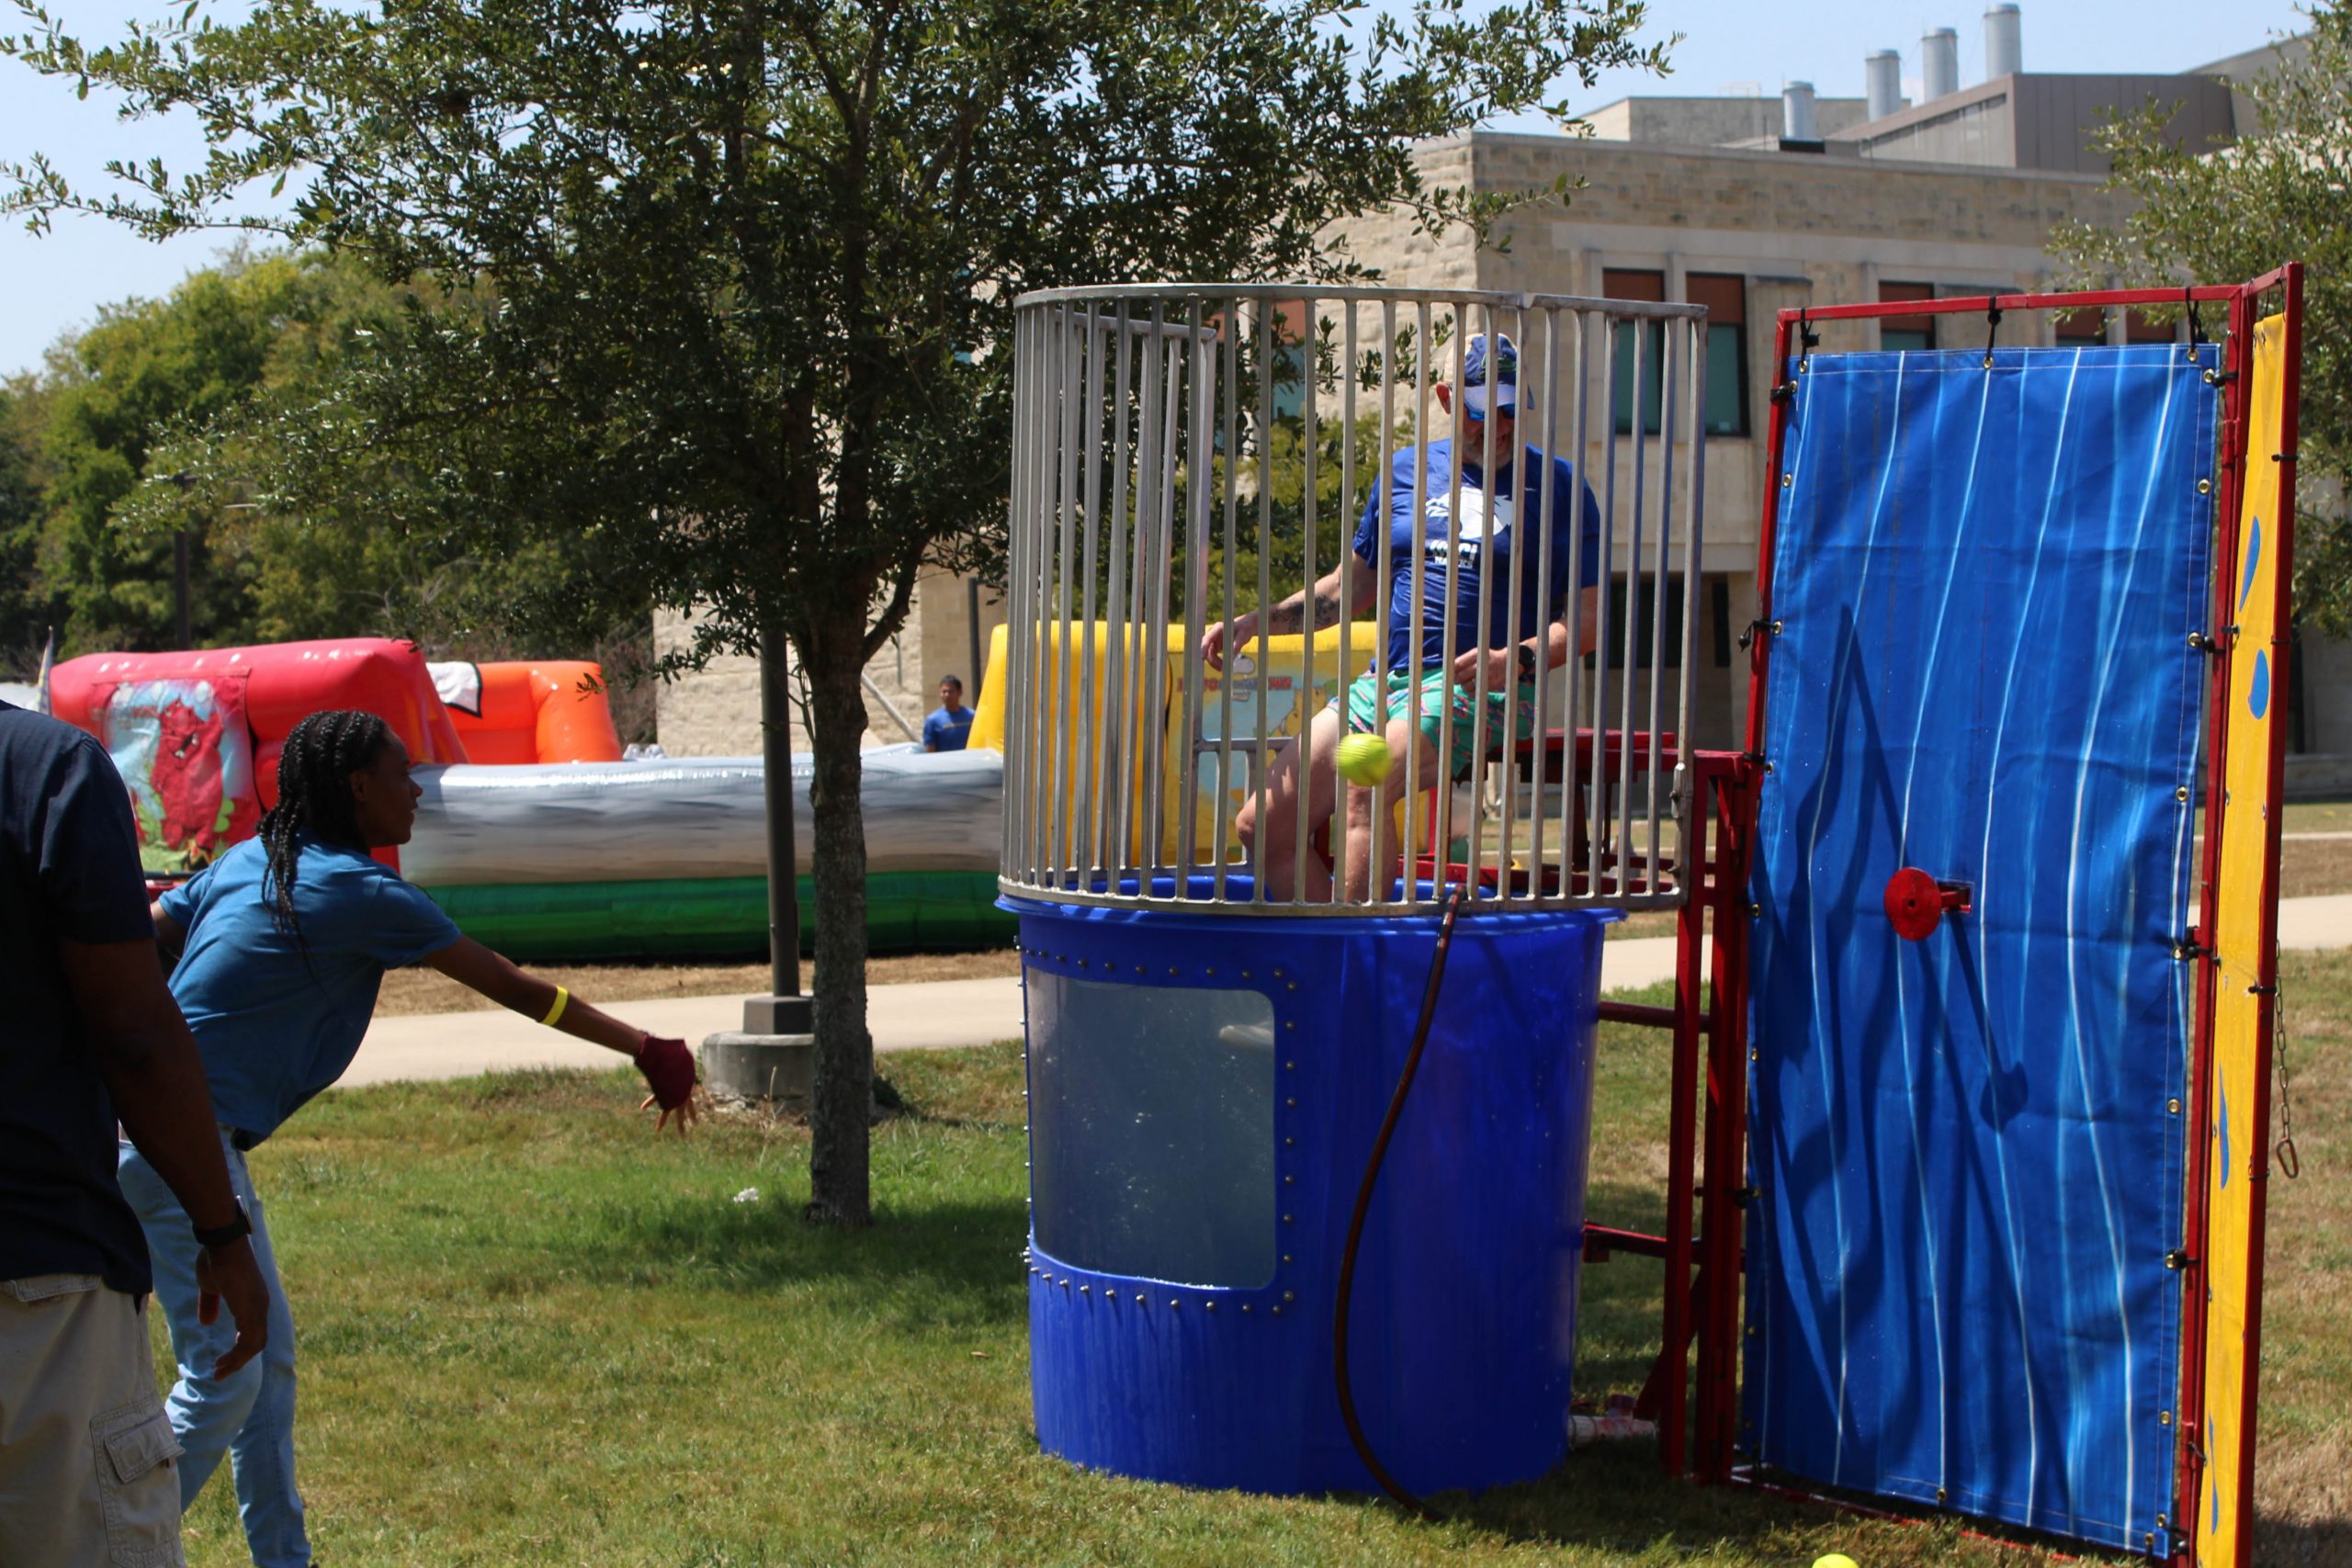 A student showing a ball to dunk a staff member in the water.